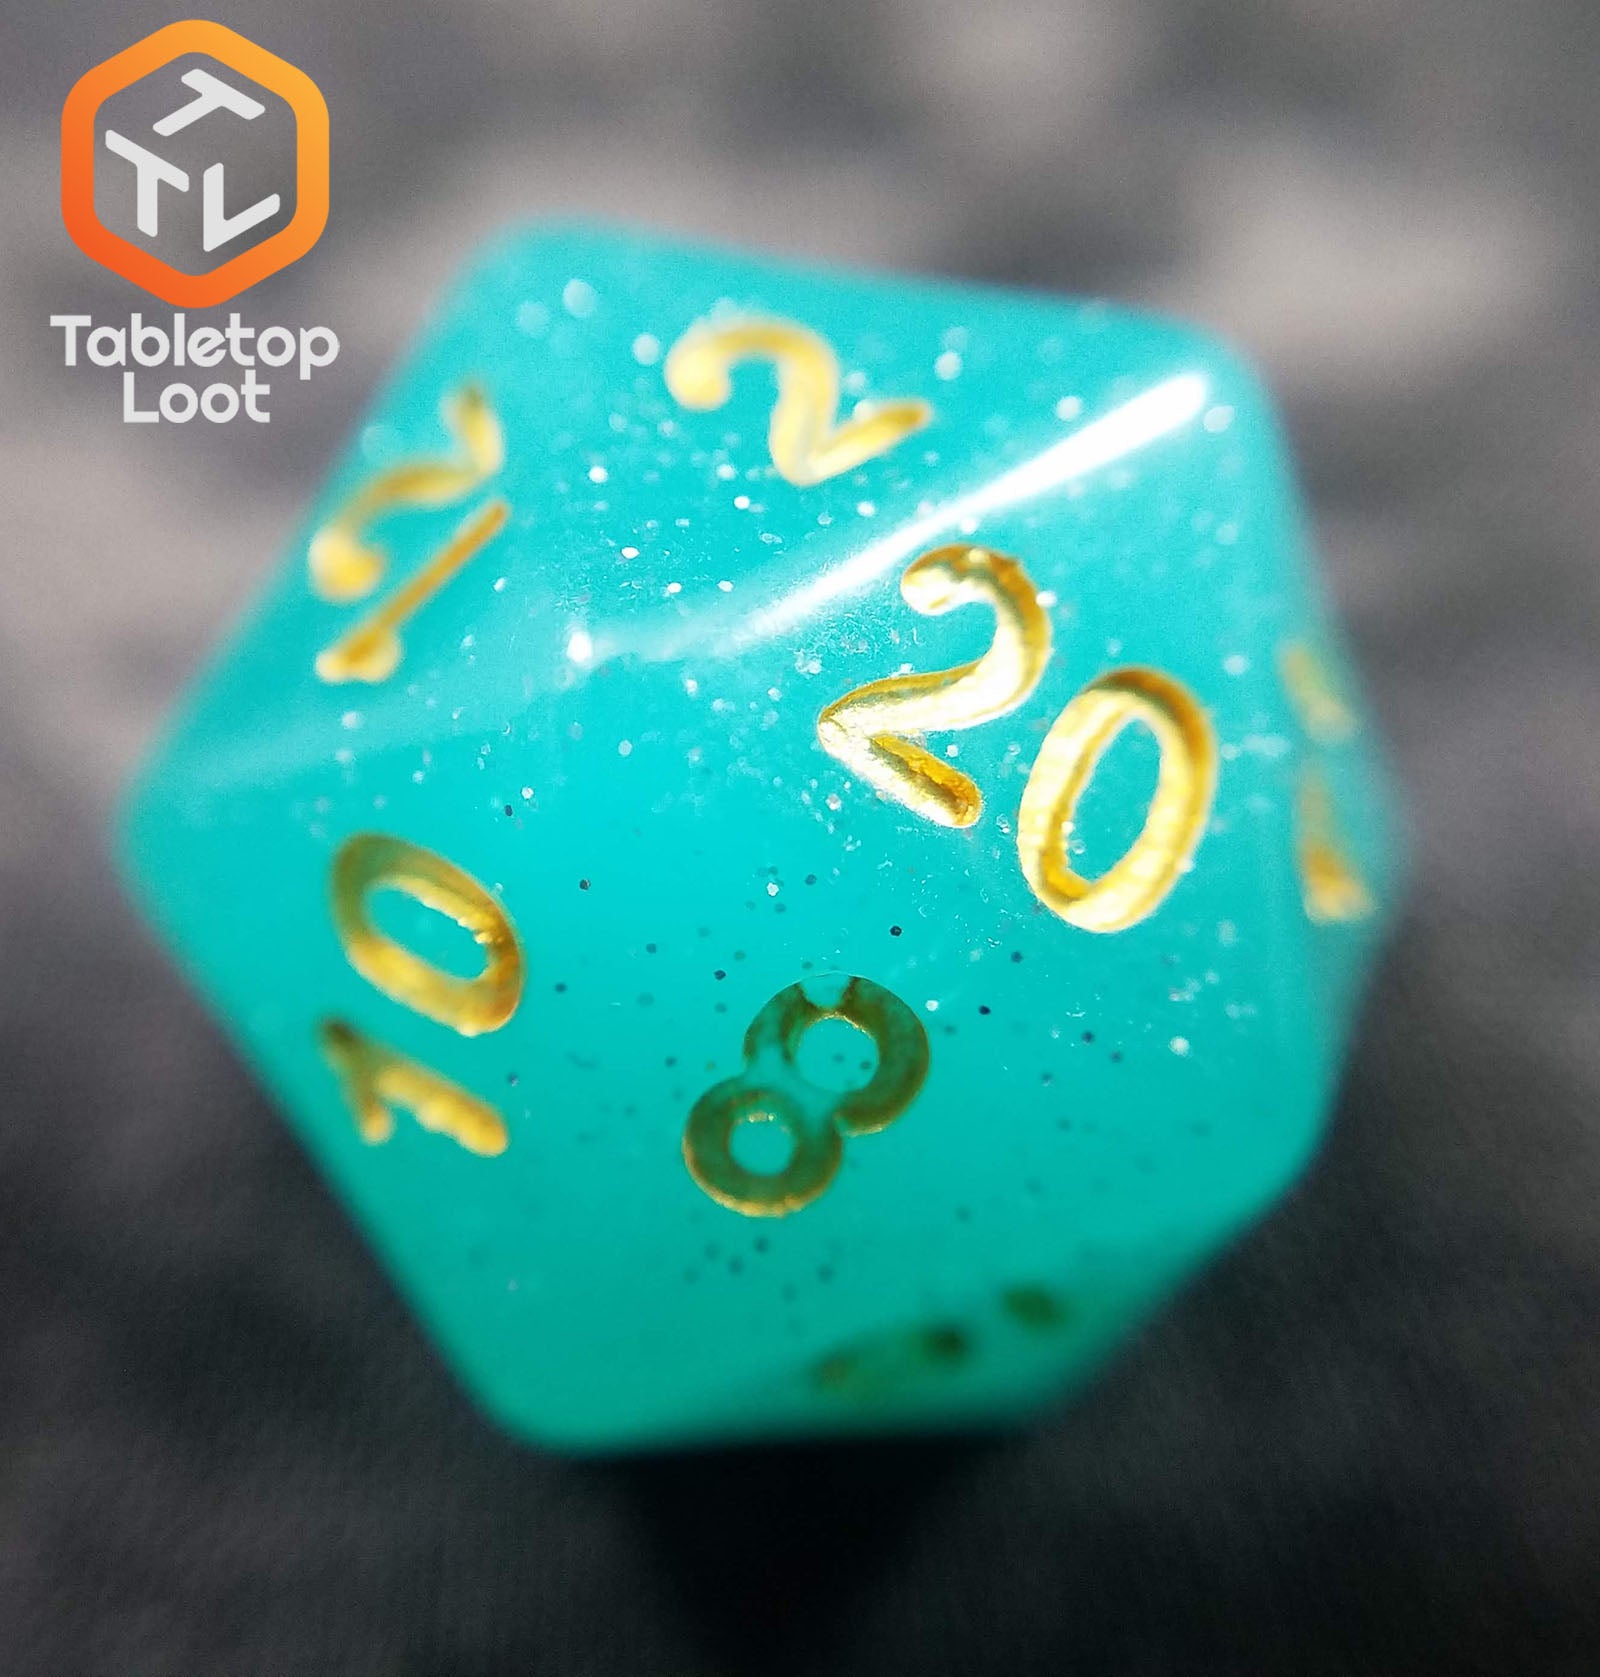 A close up of the D20 from the Blue Beryl 7 piece dice set from Tabletop Loot with a bright glittery aqua resin and gold numbering.